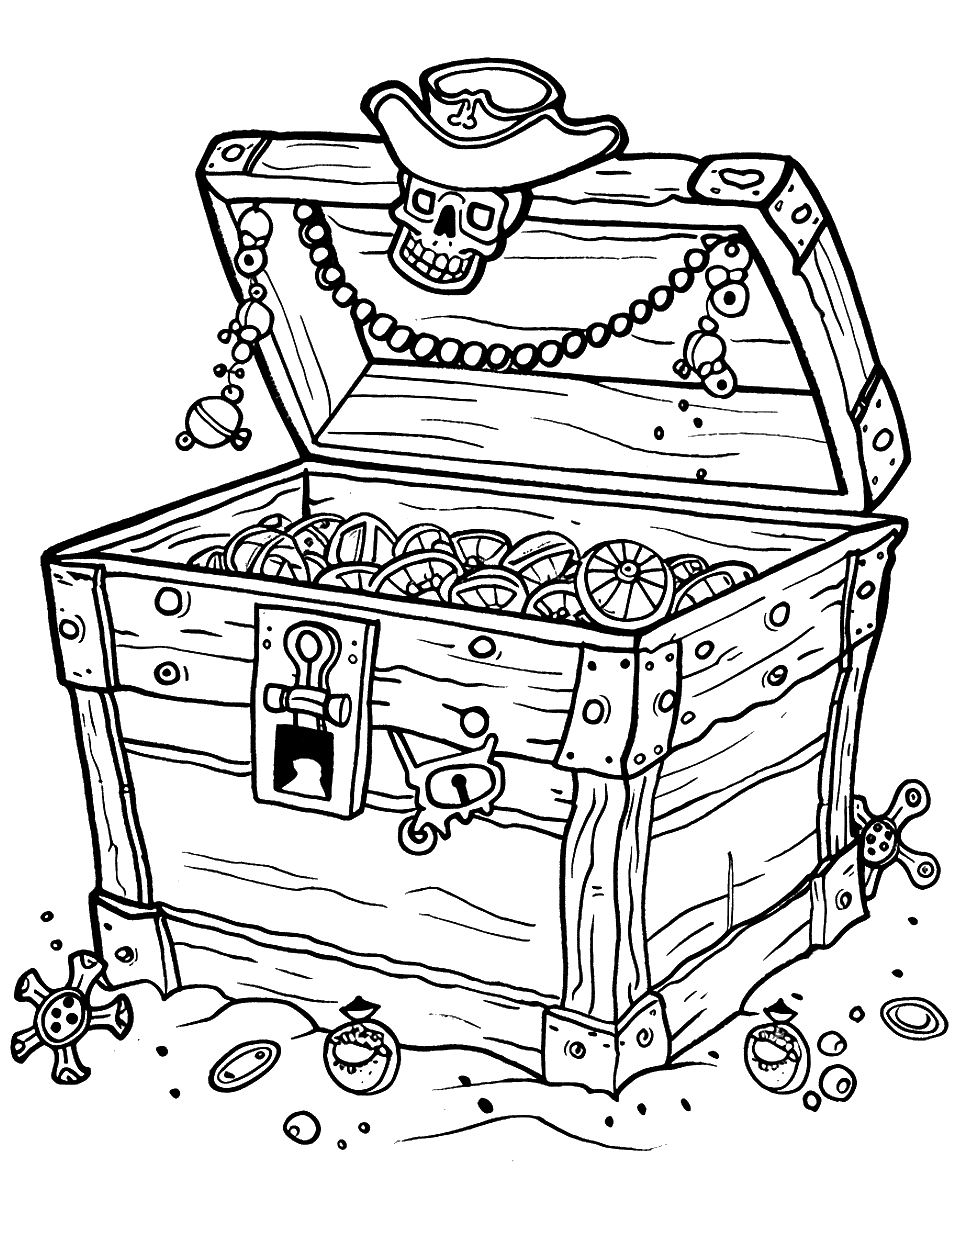 Treasure Chest Discovery Pirate Coloring Page - A treasure chest overflowing with gold and jewels, partially buried in sand.